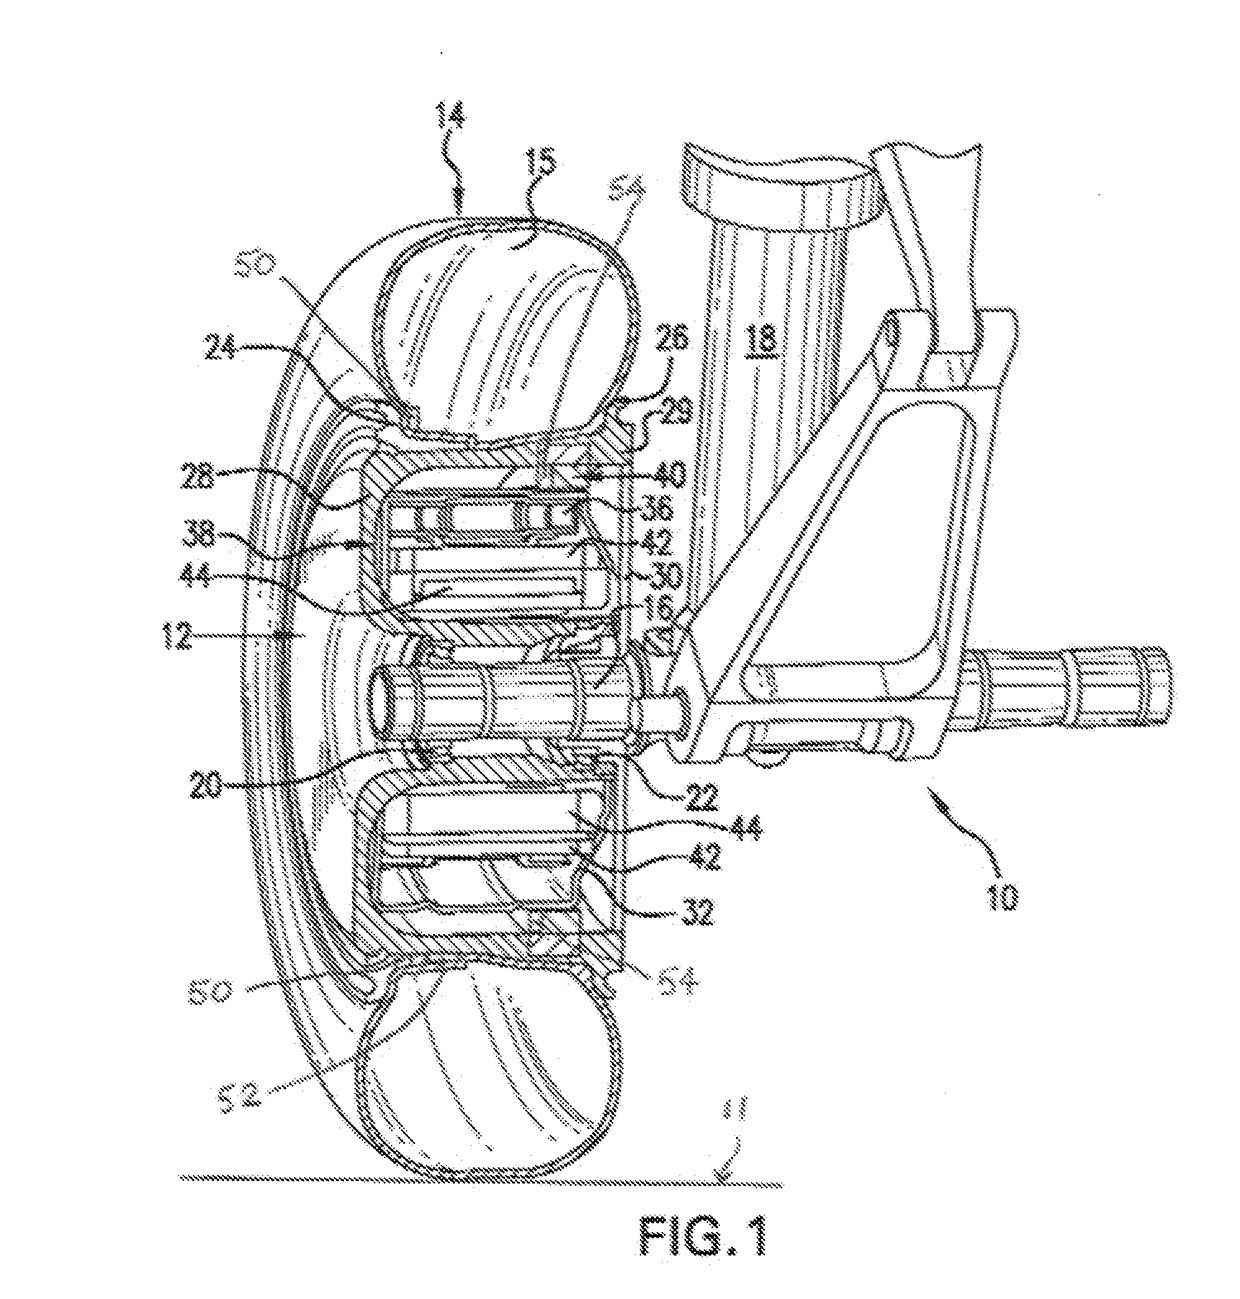 Method for using aircraft wheel tyre pressure to improve aircraft energy efficiency and drive system performance